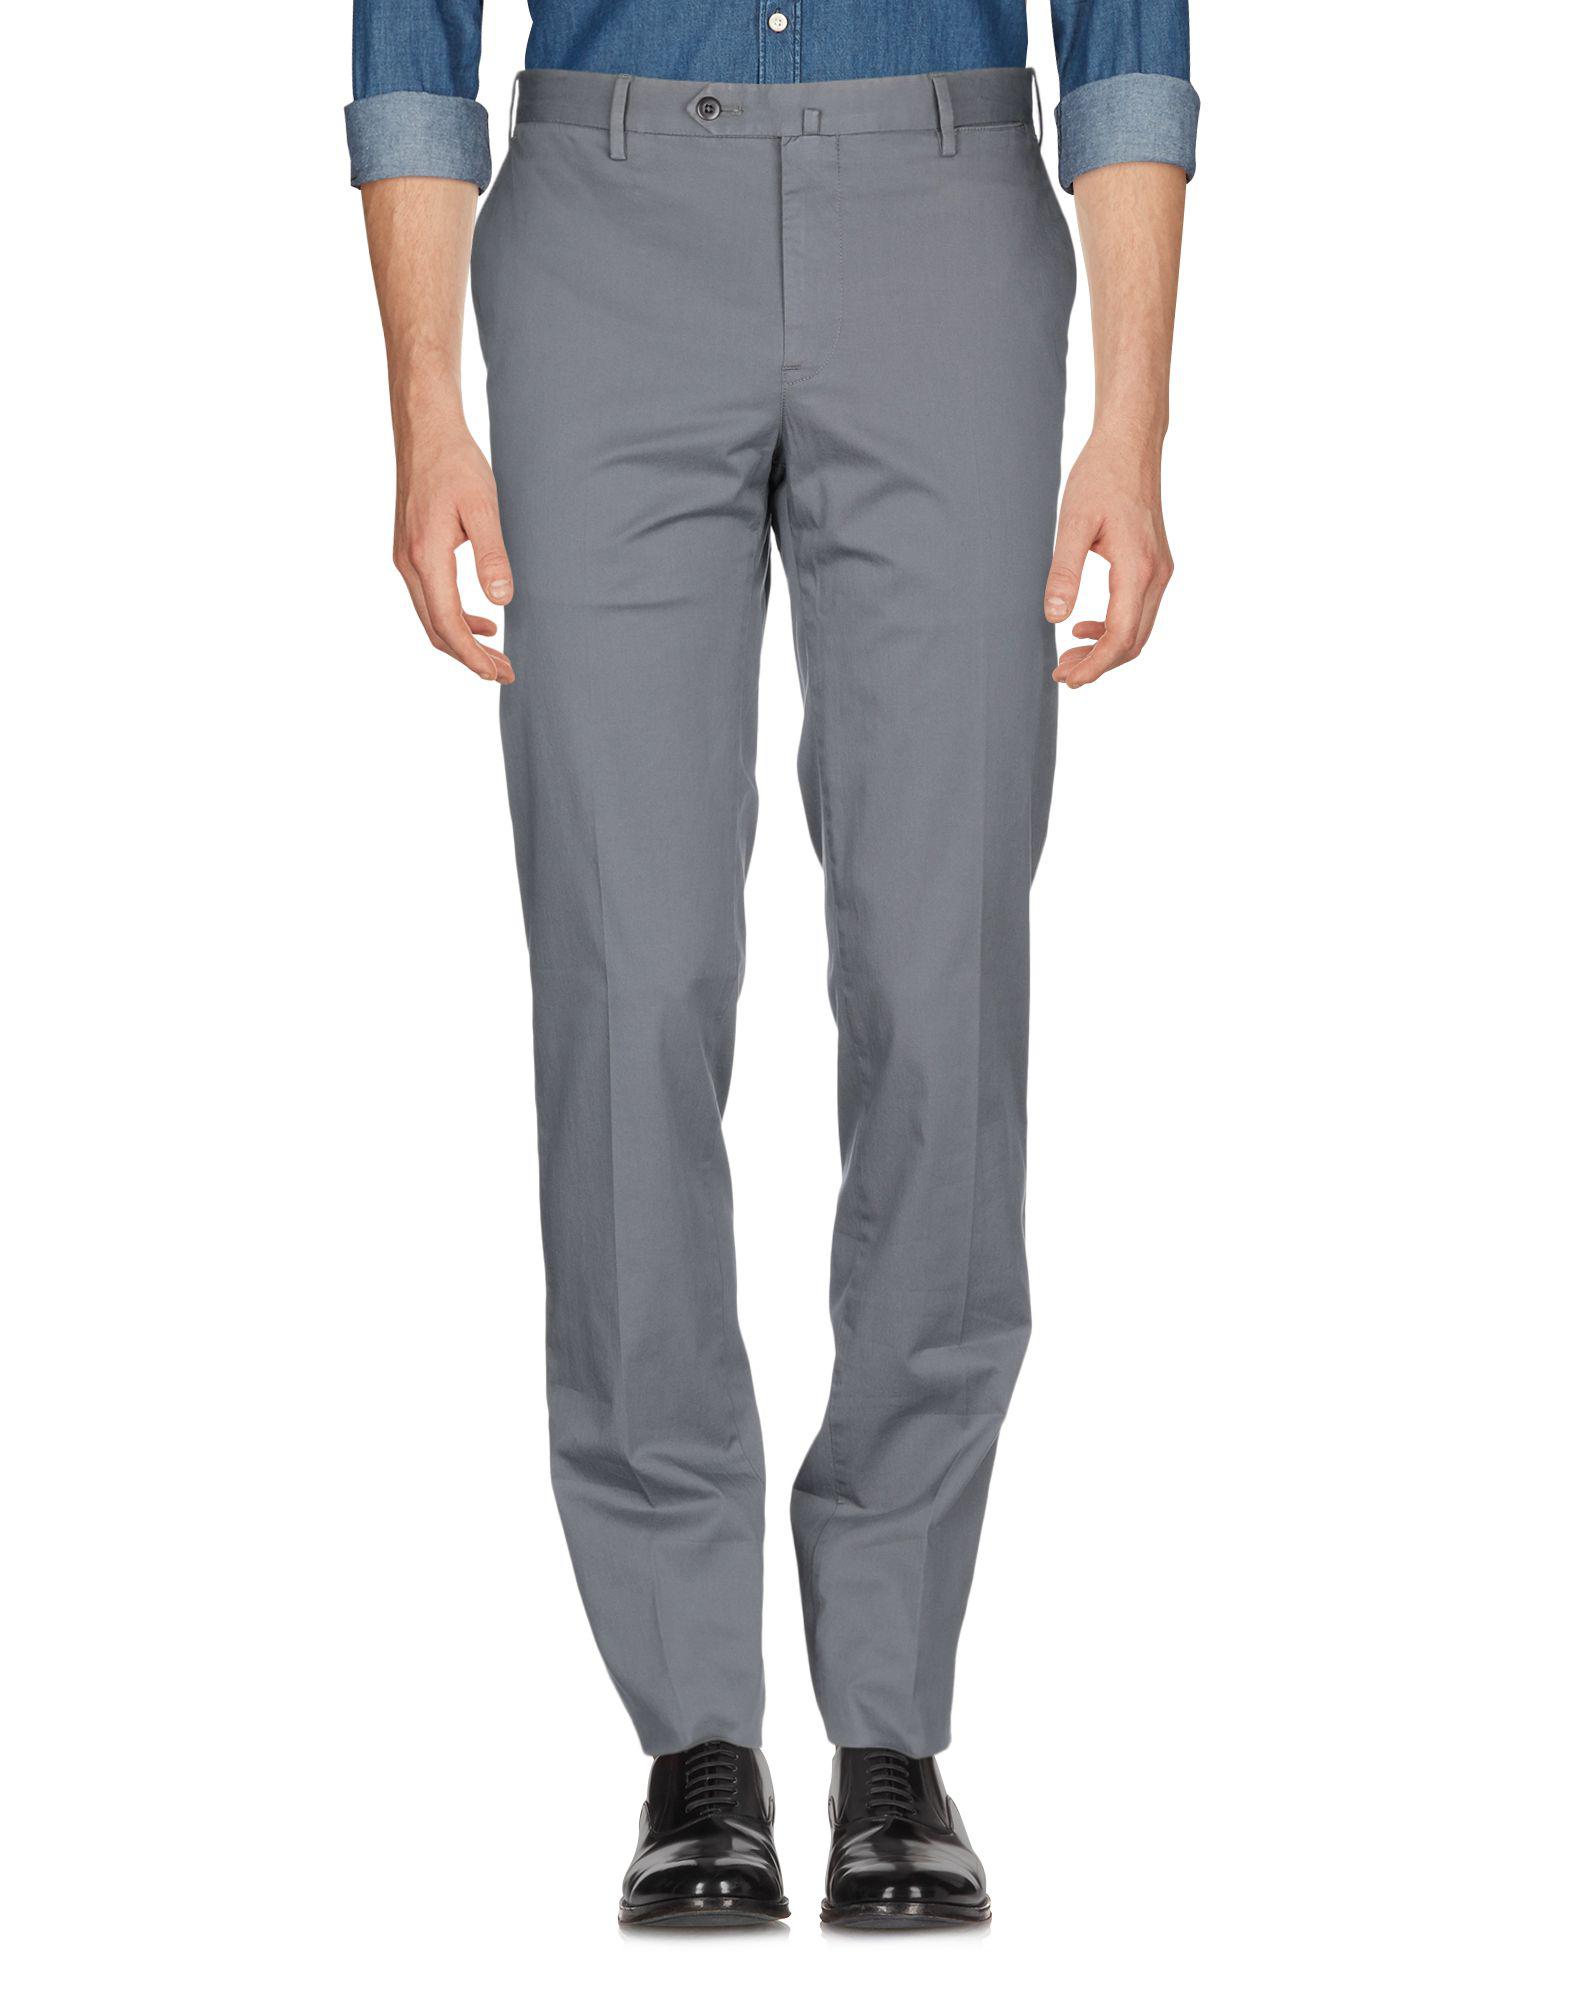 PT01 Cotton Casual Pants in Grey (Gray) for Men - Lyst